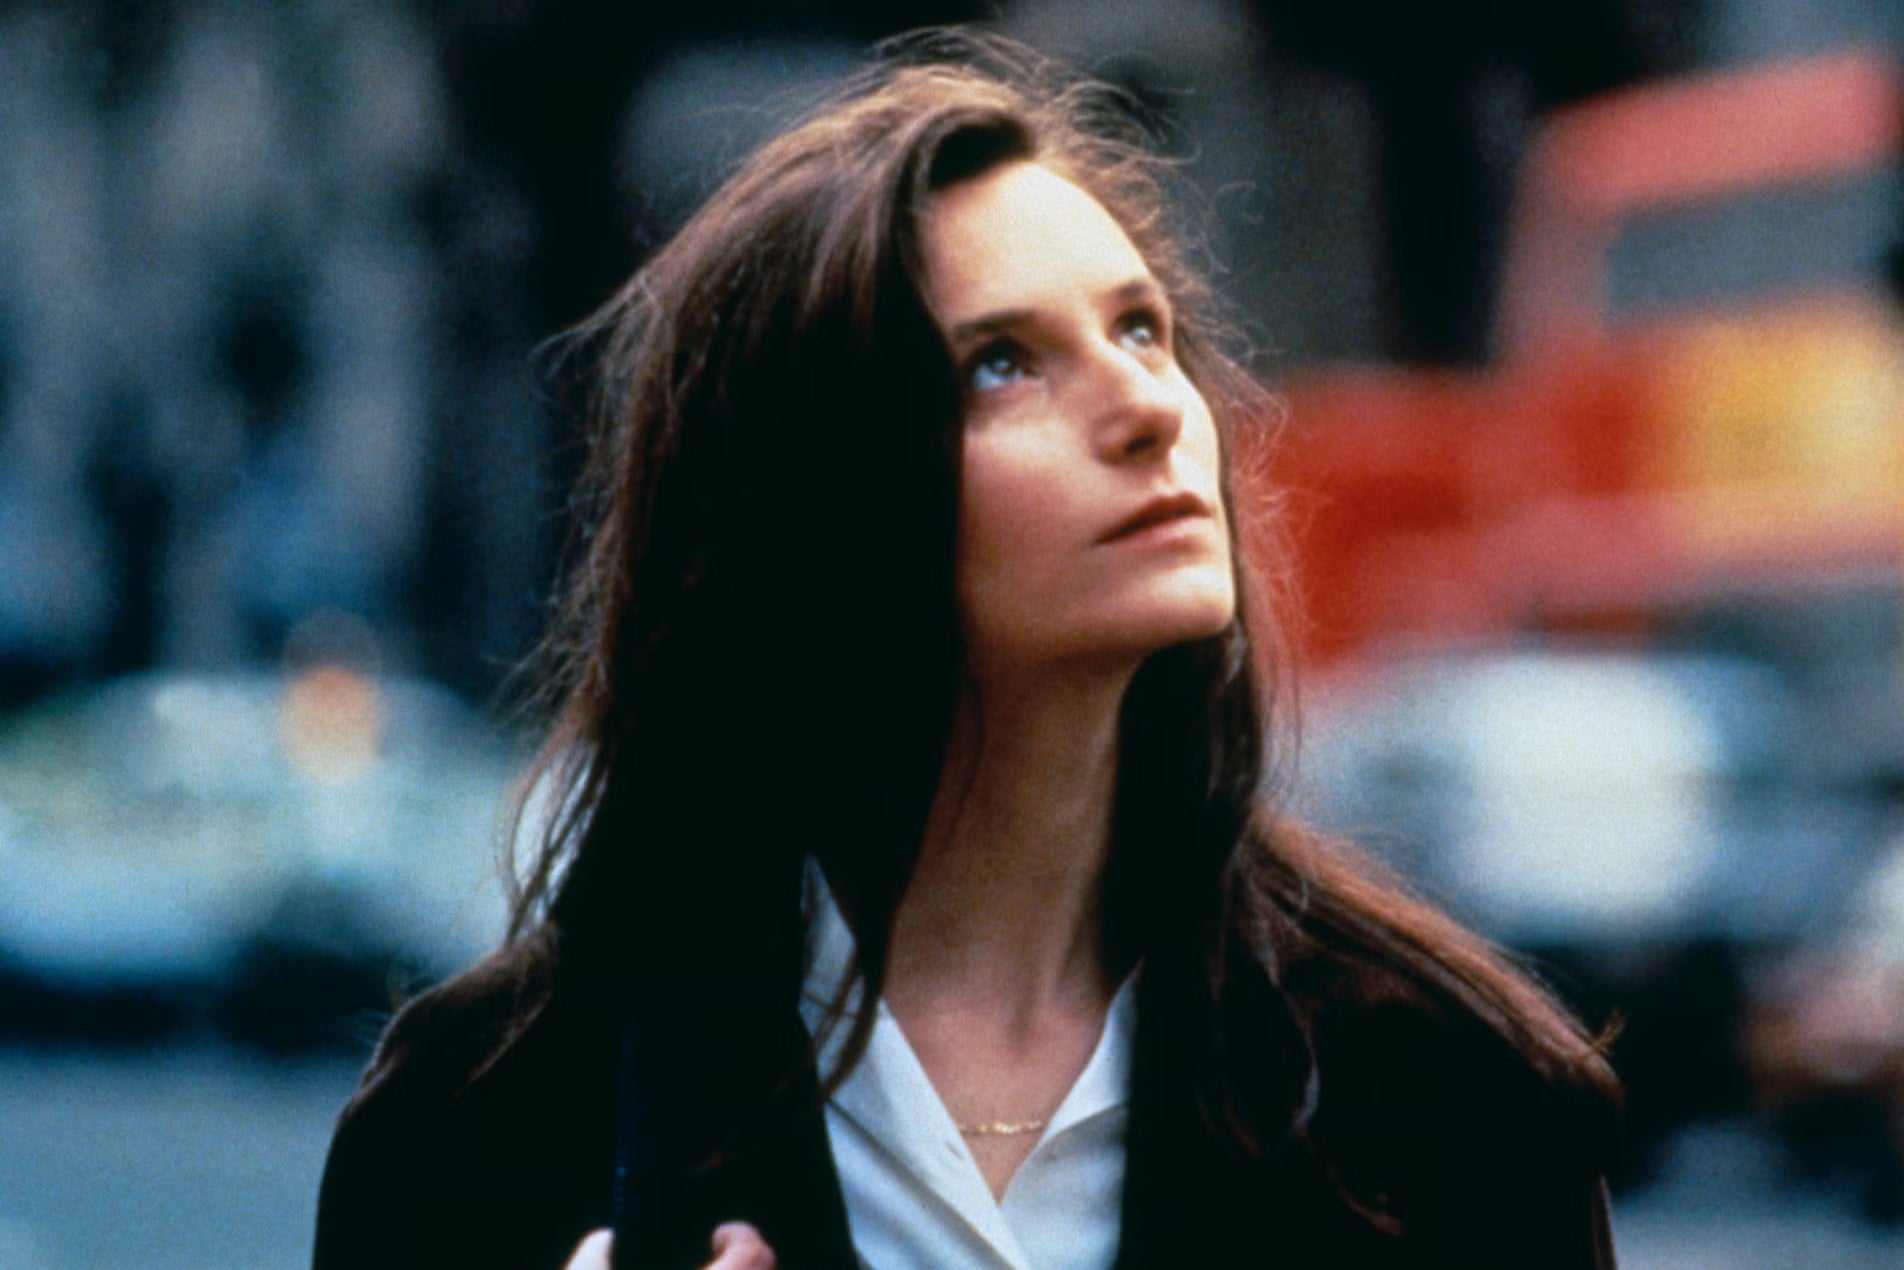 ‘She threw herself into things, she was a free spirit, and she took no s*** from anybody’: Katrin Cartlidge in 1994’s ‘Before the Rain’